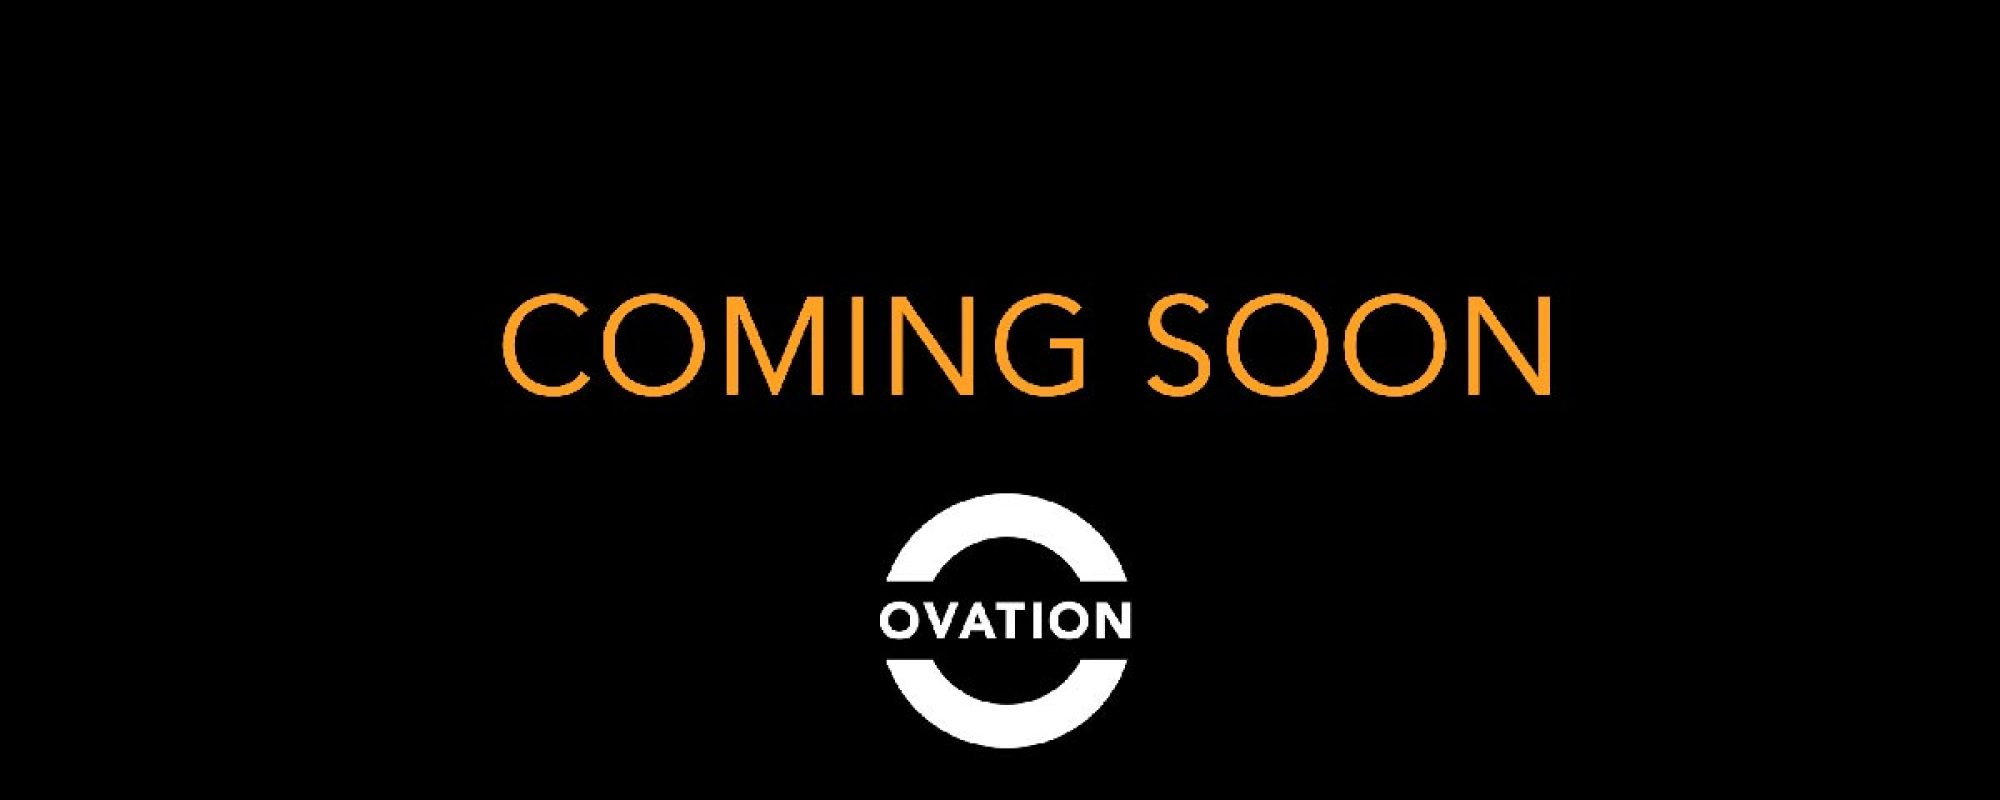 Inside The Actors Studio is Coming to Ovation TV!